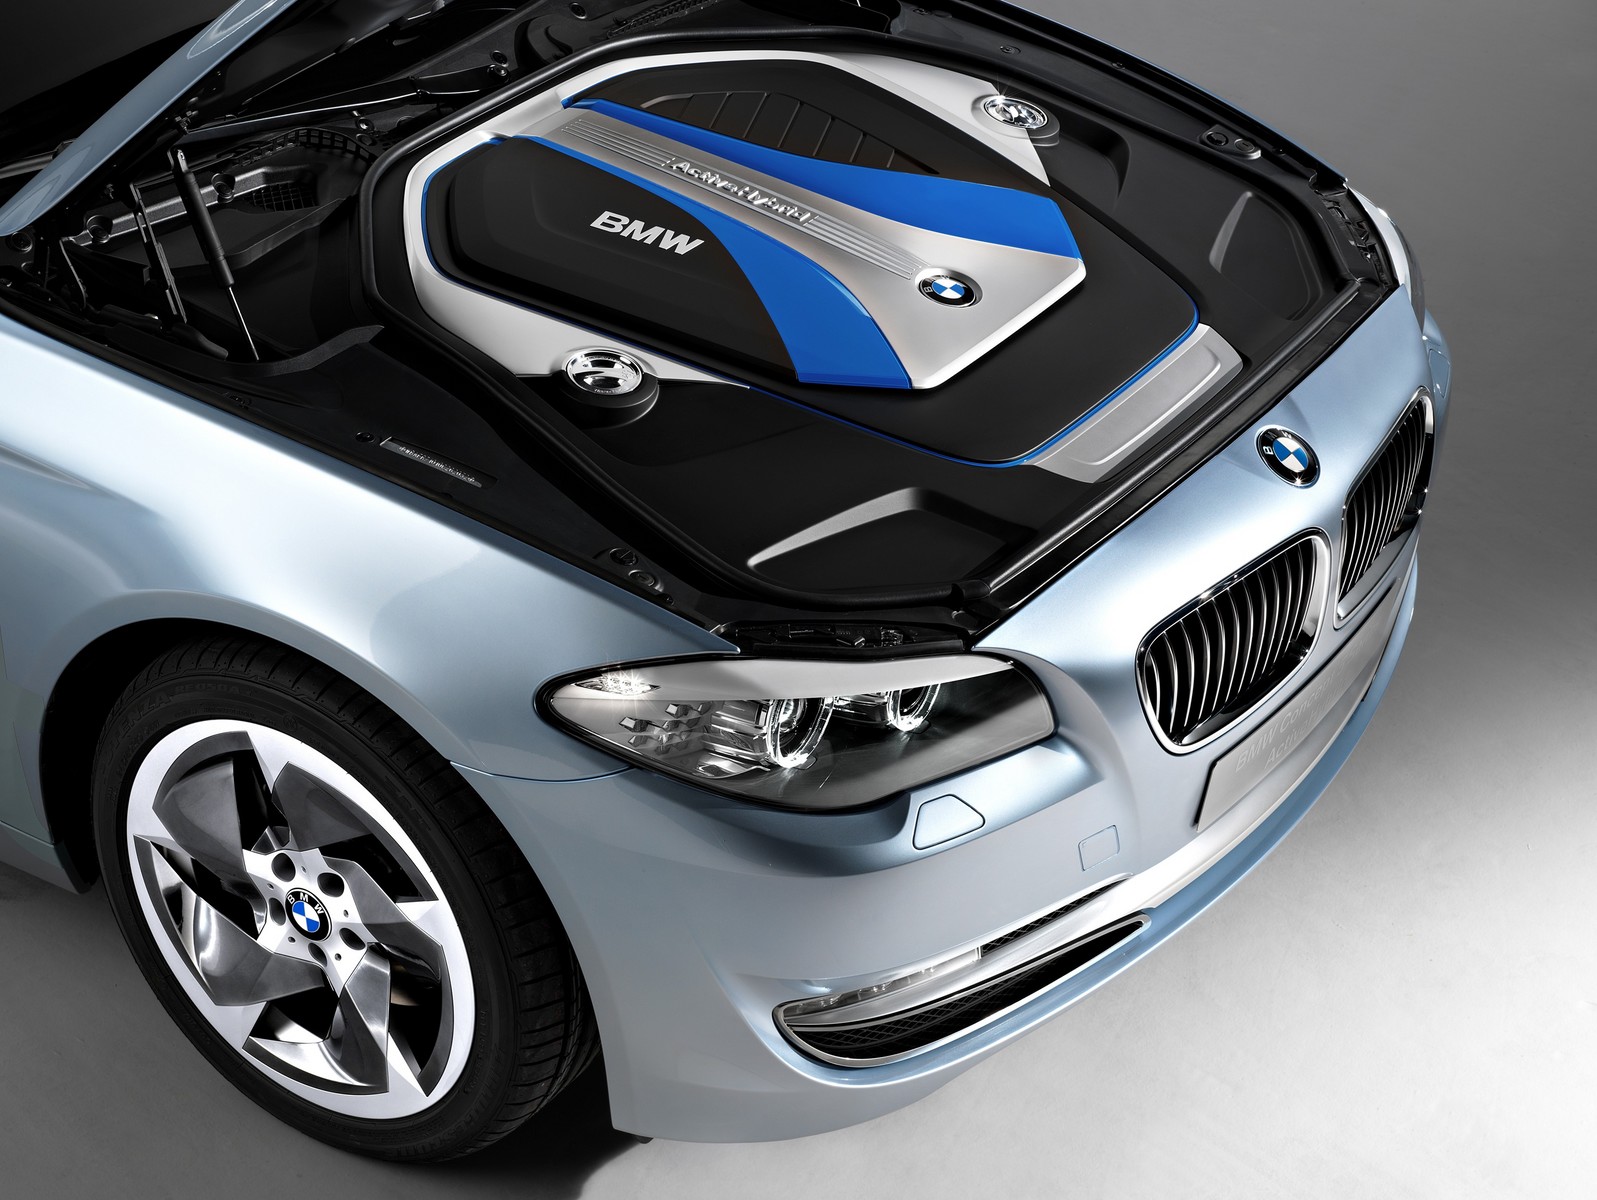 BMW ActiveHybrid 5 coming to dealerships in Spring 2012